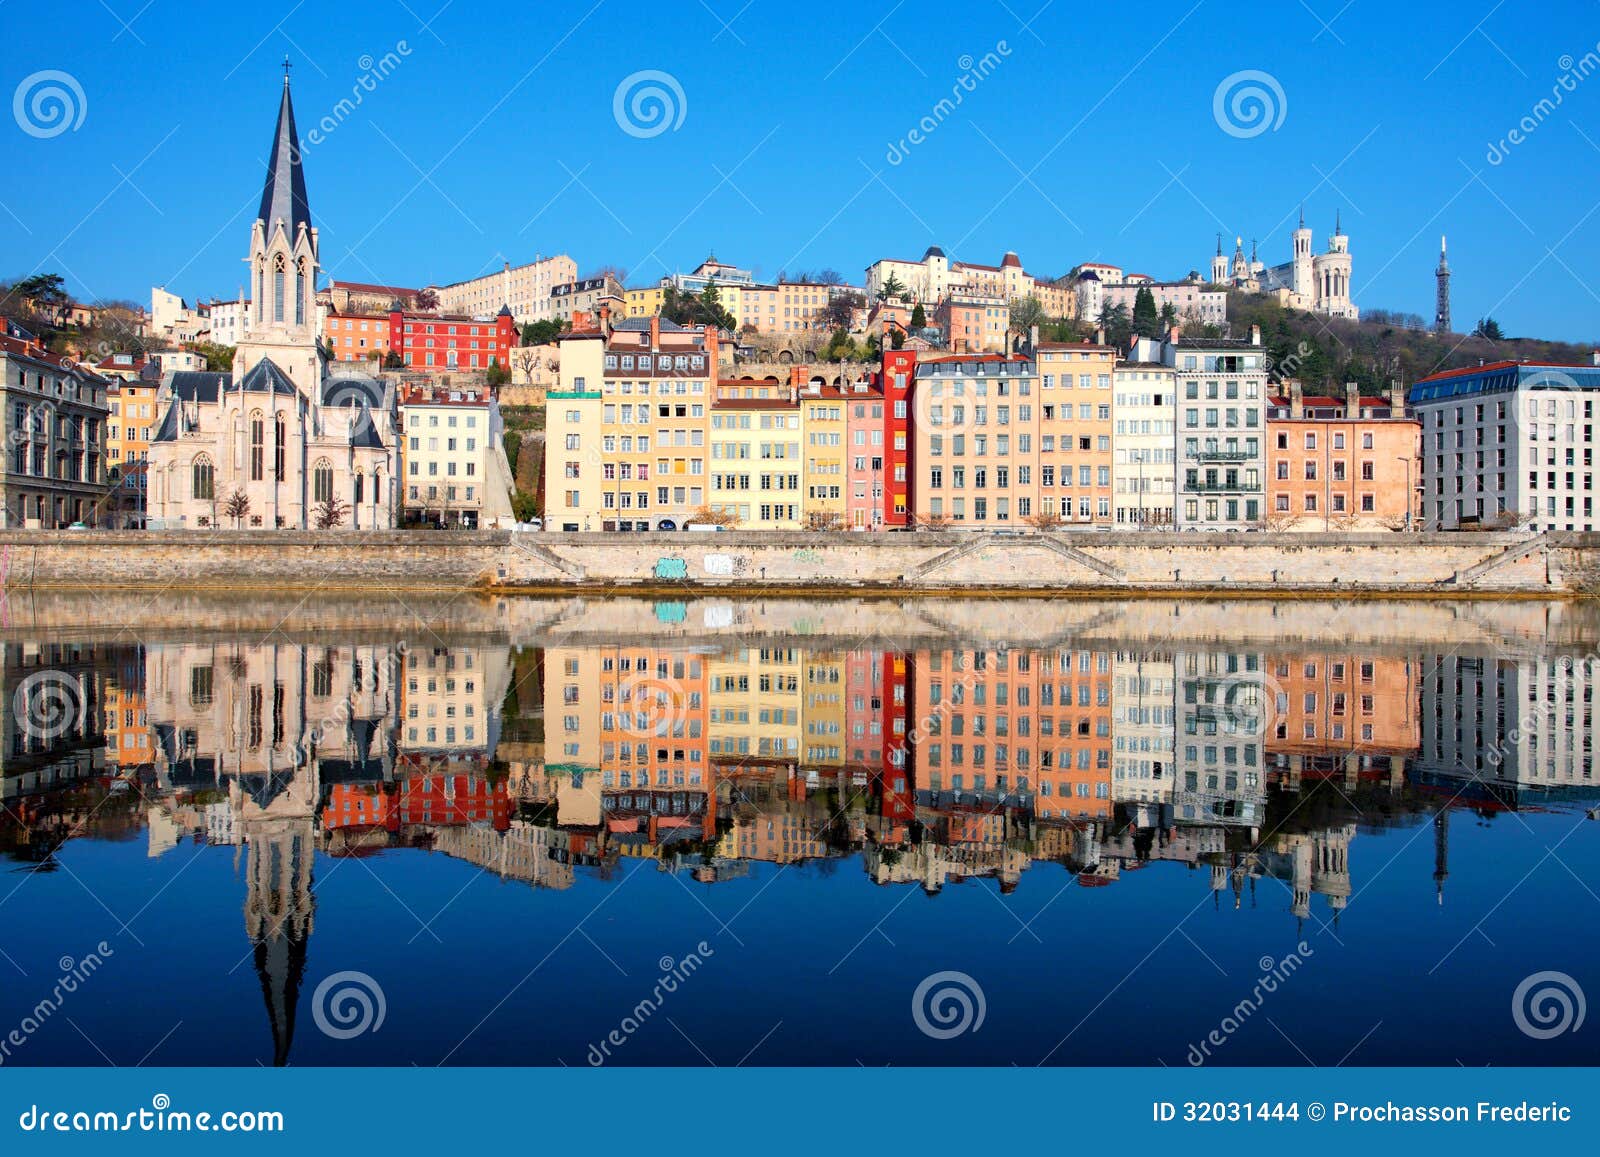 famous view of saone river in lyon city